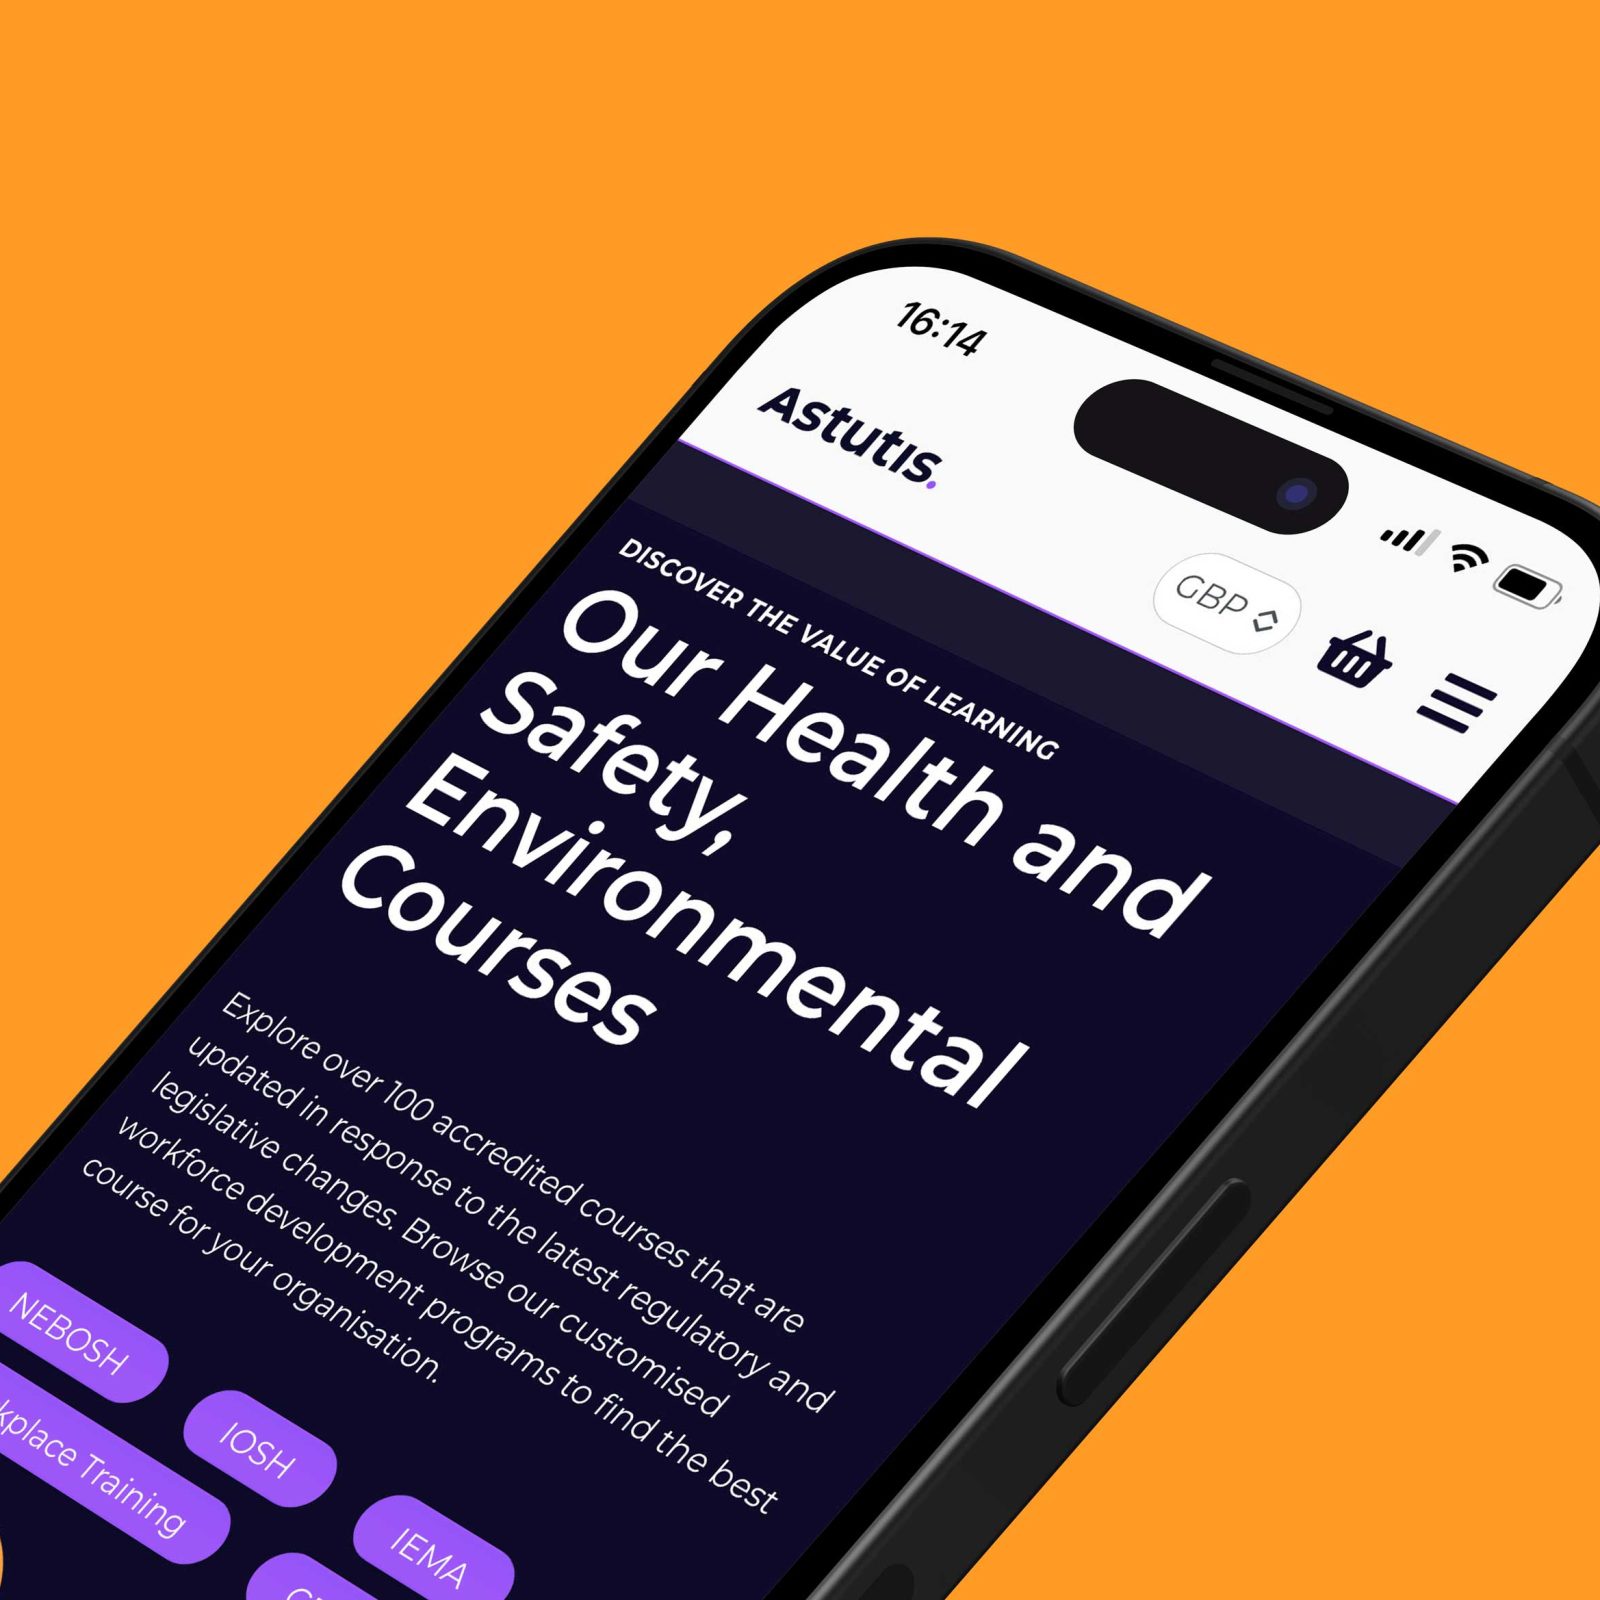 A smartphone displaying a website designed by a Web Agency Bristol, offering courses on health and safety, and environmental issues. The screen shows menu options and a search bar on a vibrant orange background.